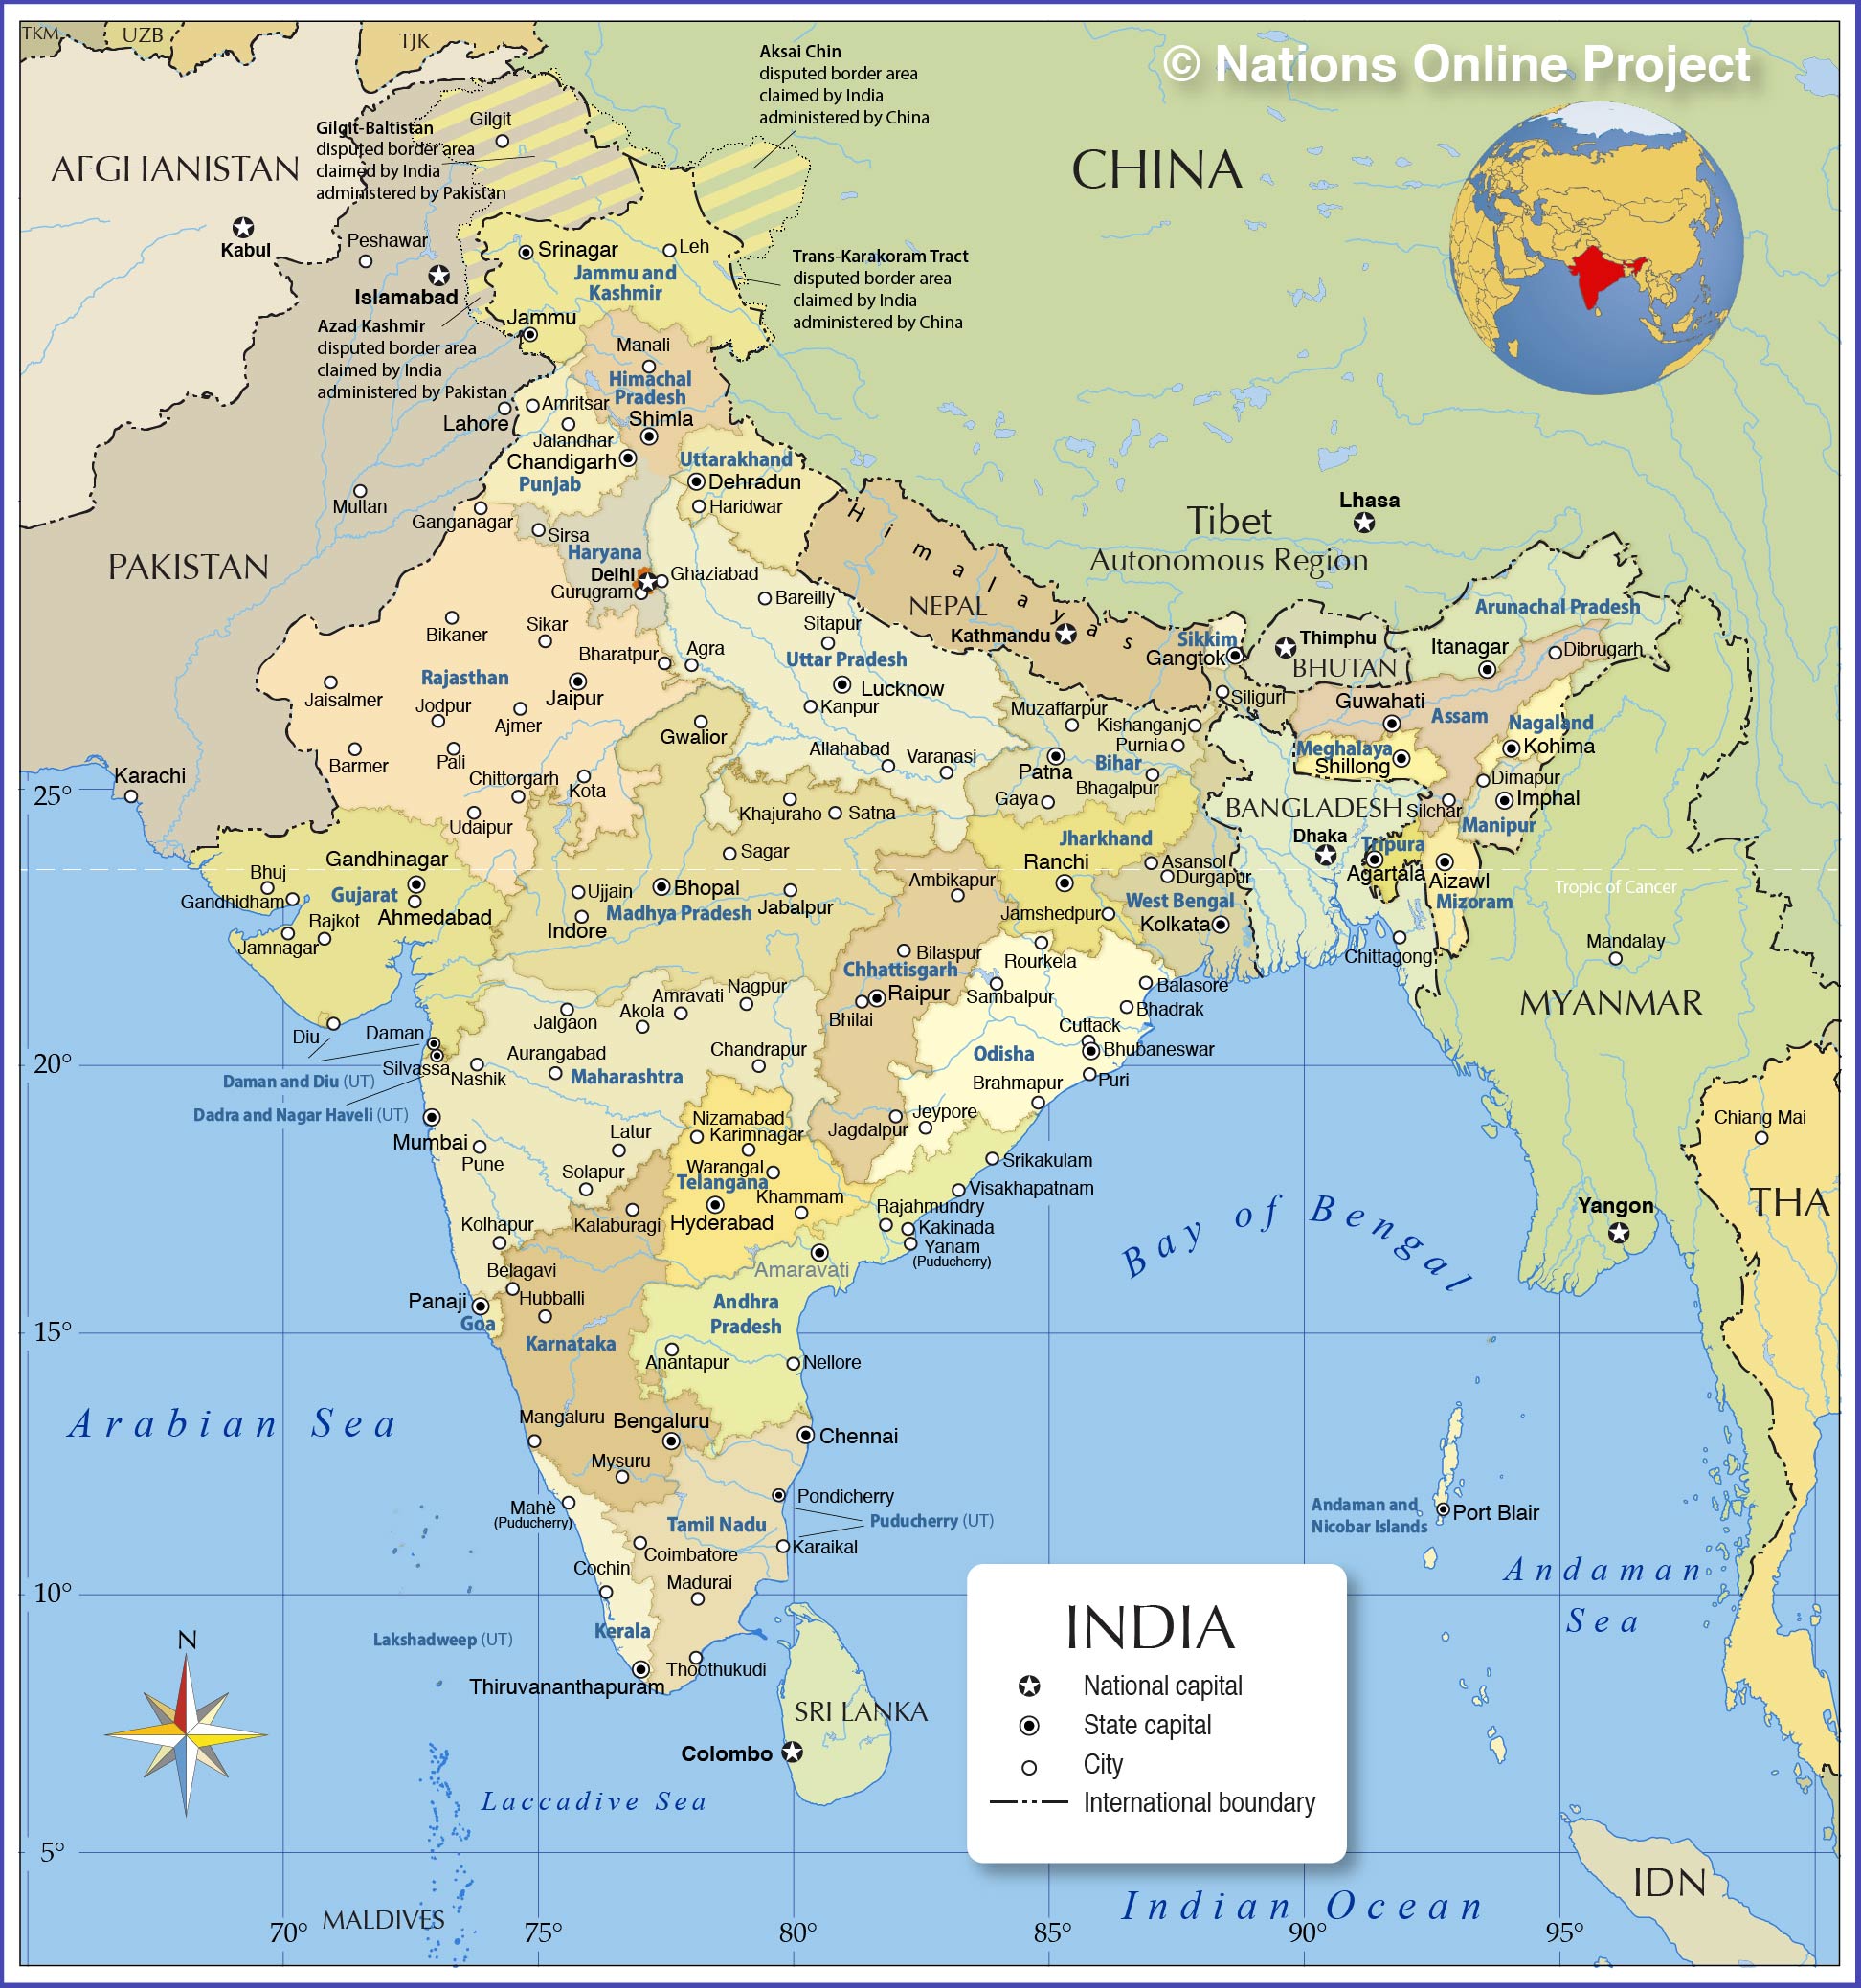 labeled map of india with cities Political Map Of India S States Nations Online Project labeled map of india with cities